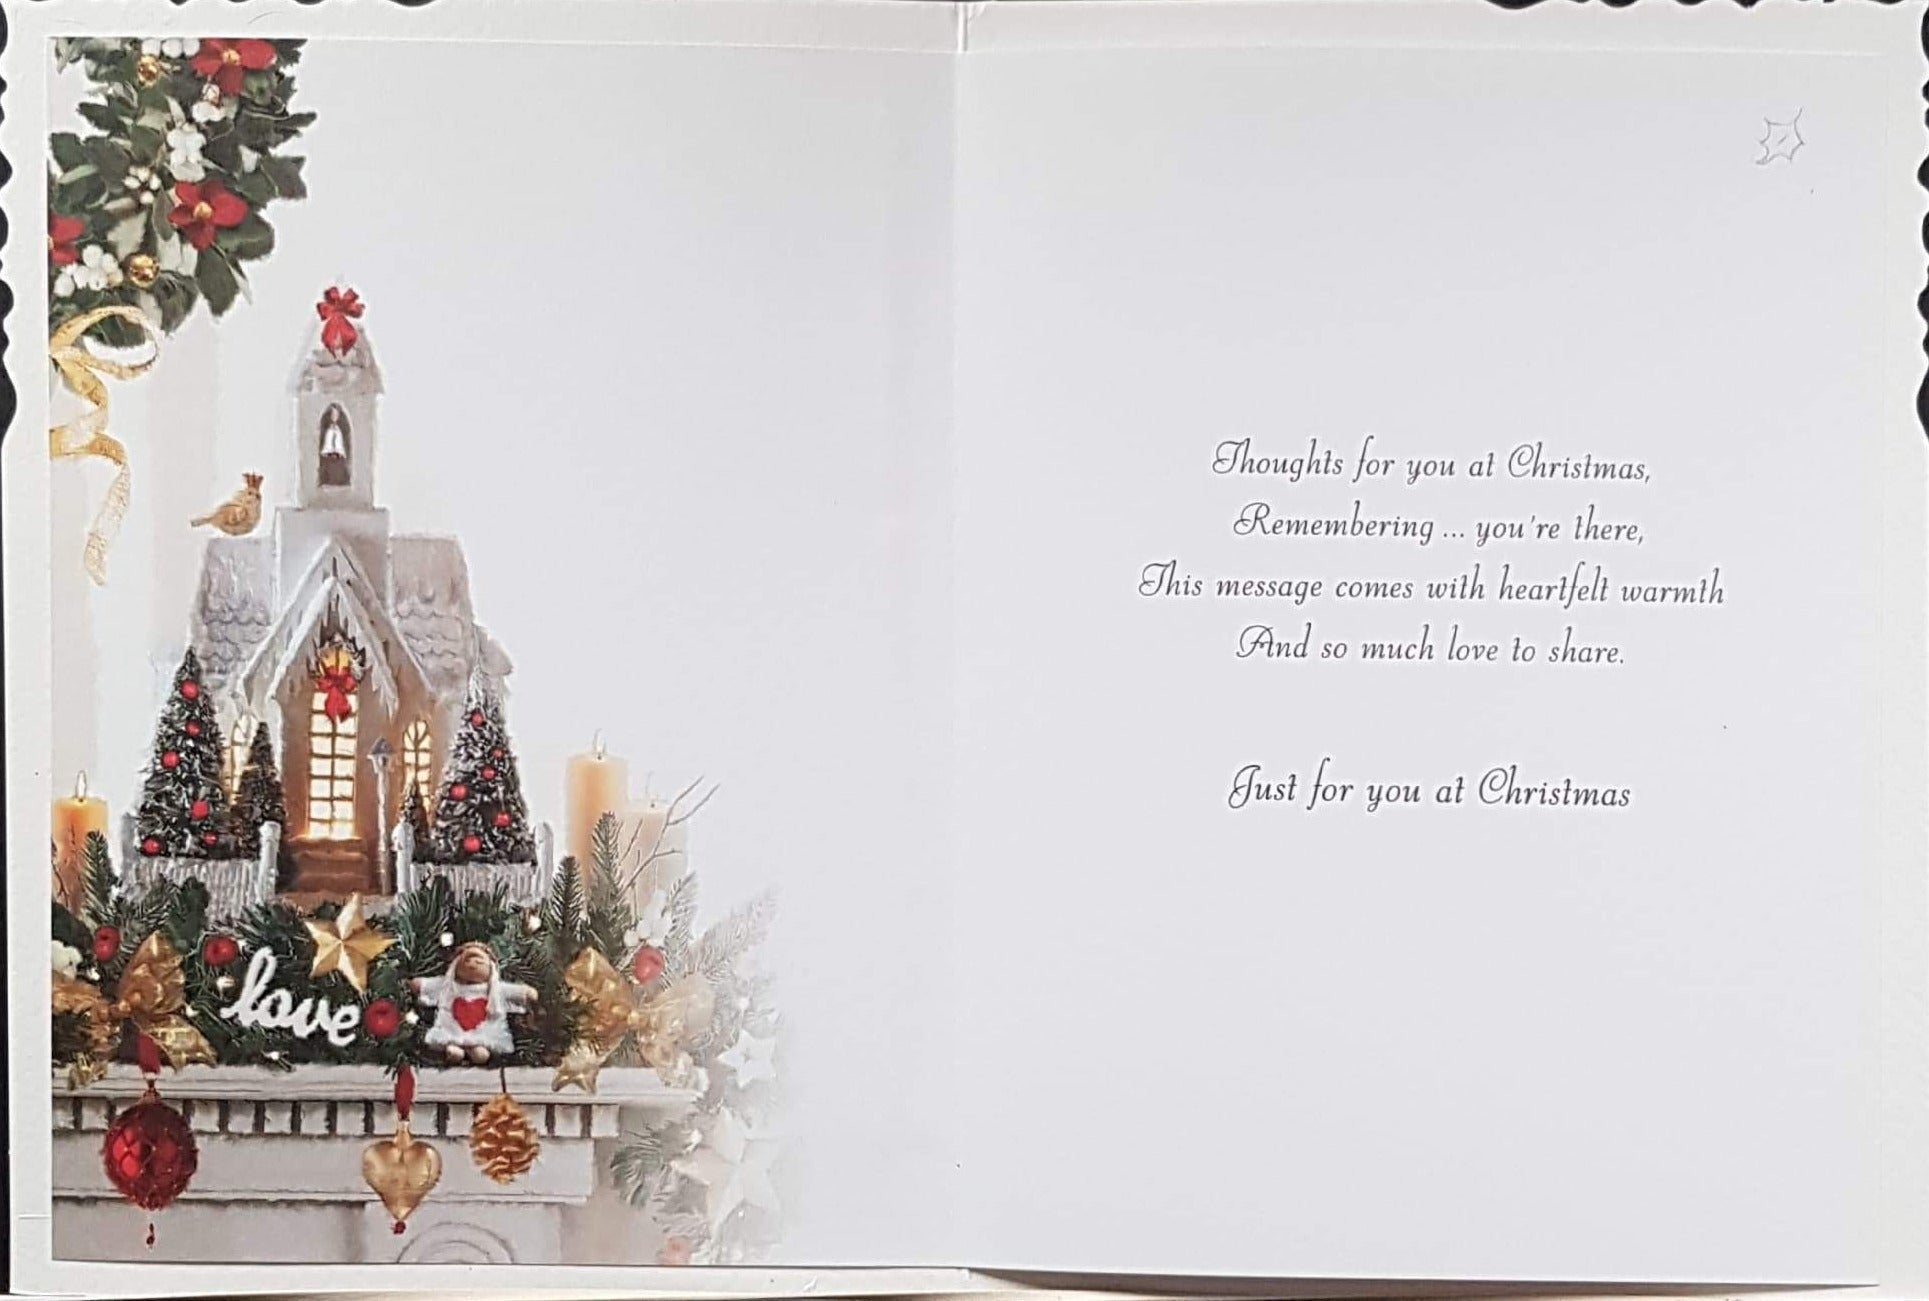 Thinking of You Christmas Card - At Christmas Time & Church Ornament & Garland on Mantelpiece